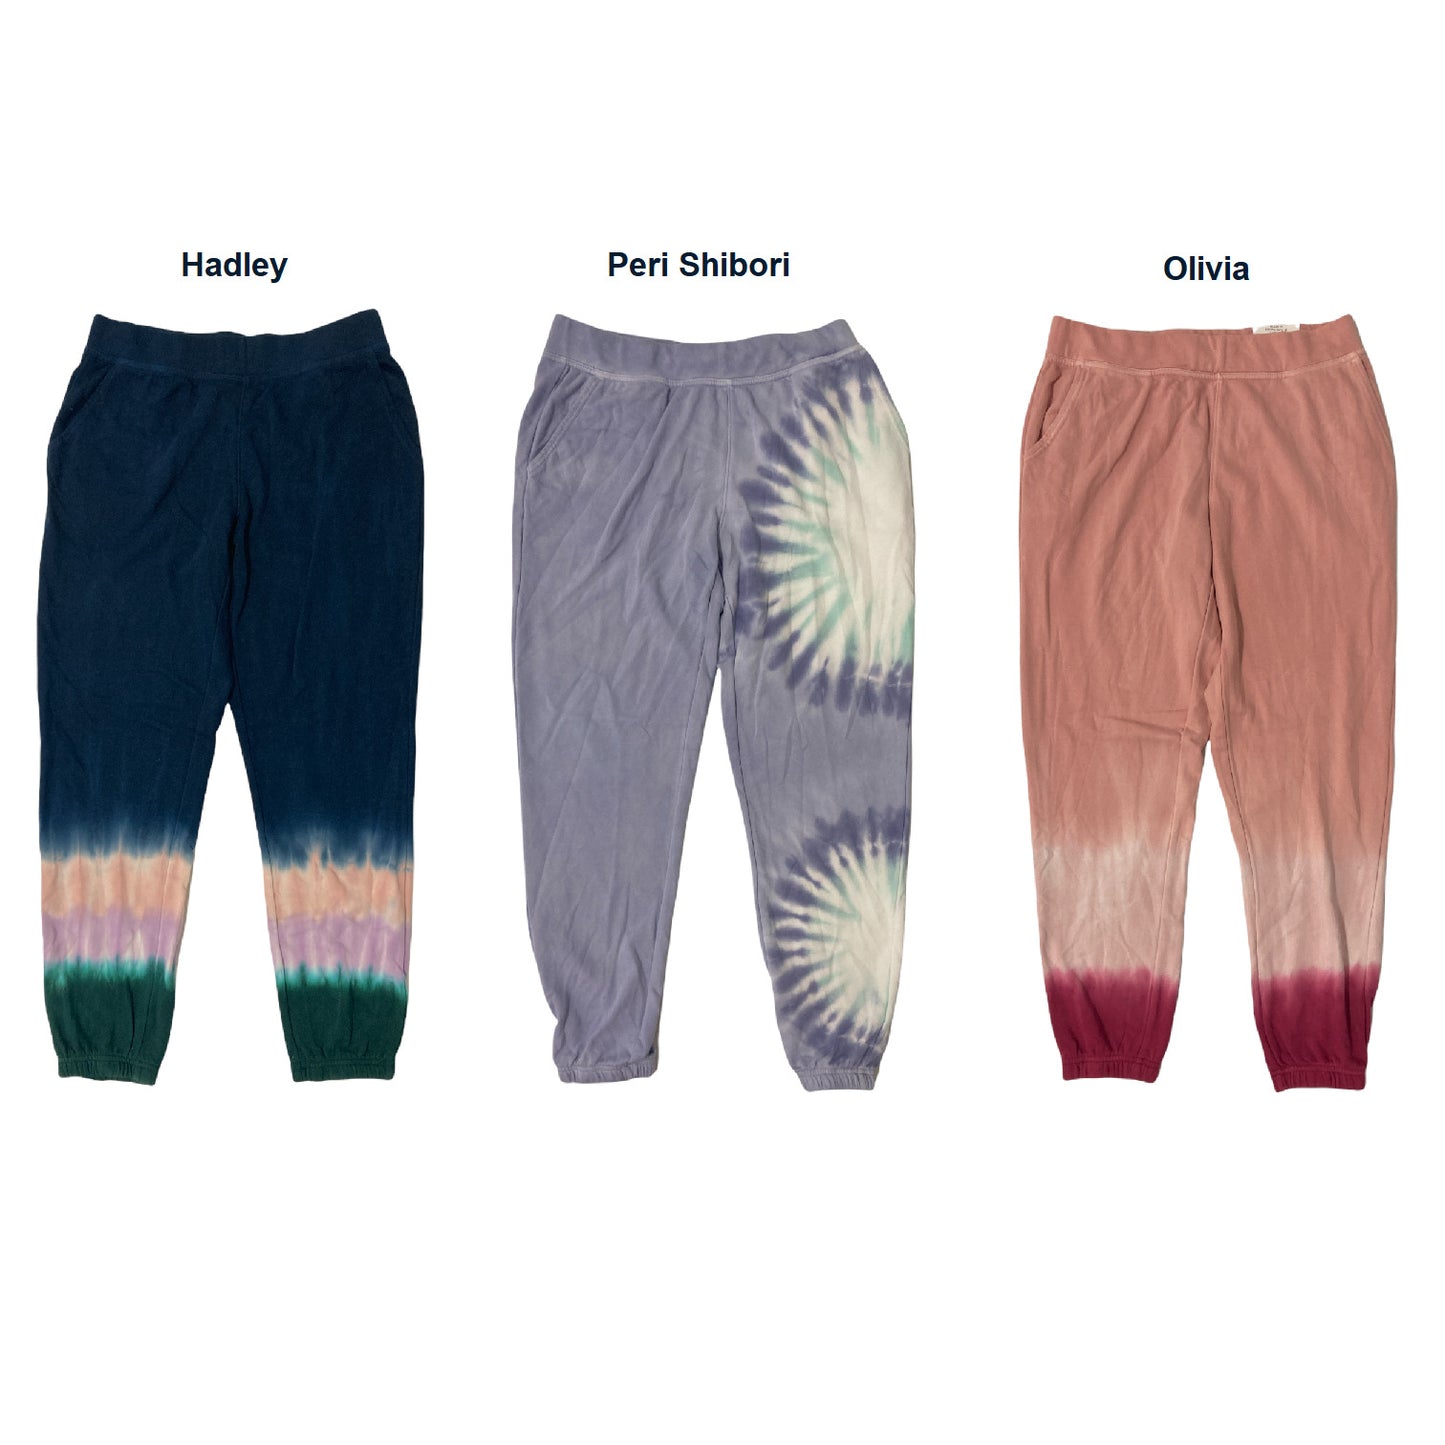 Wildfox Women's French Terry Relaxed Fit Tie-Dye Jogger Sweatpants